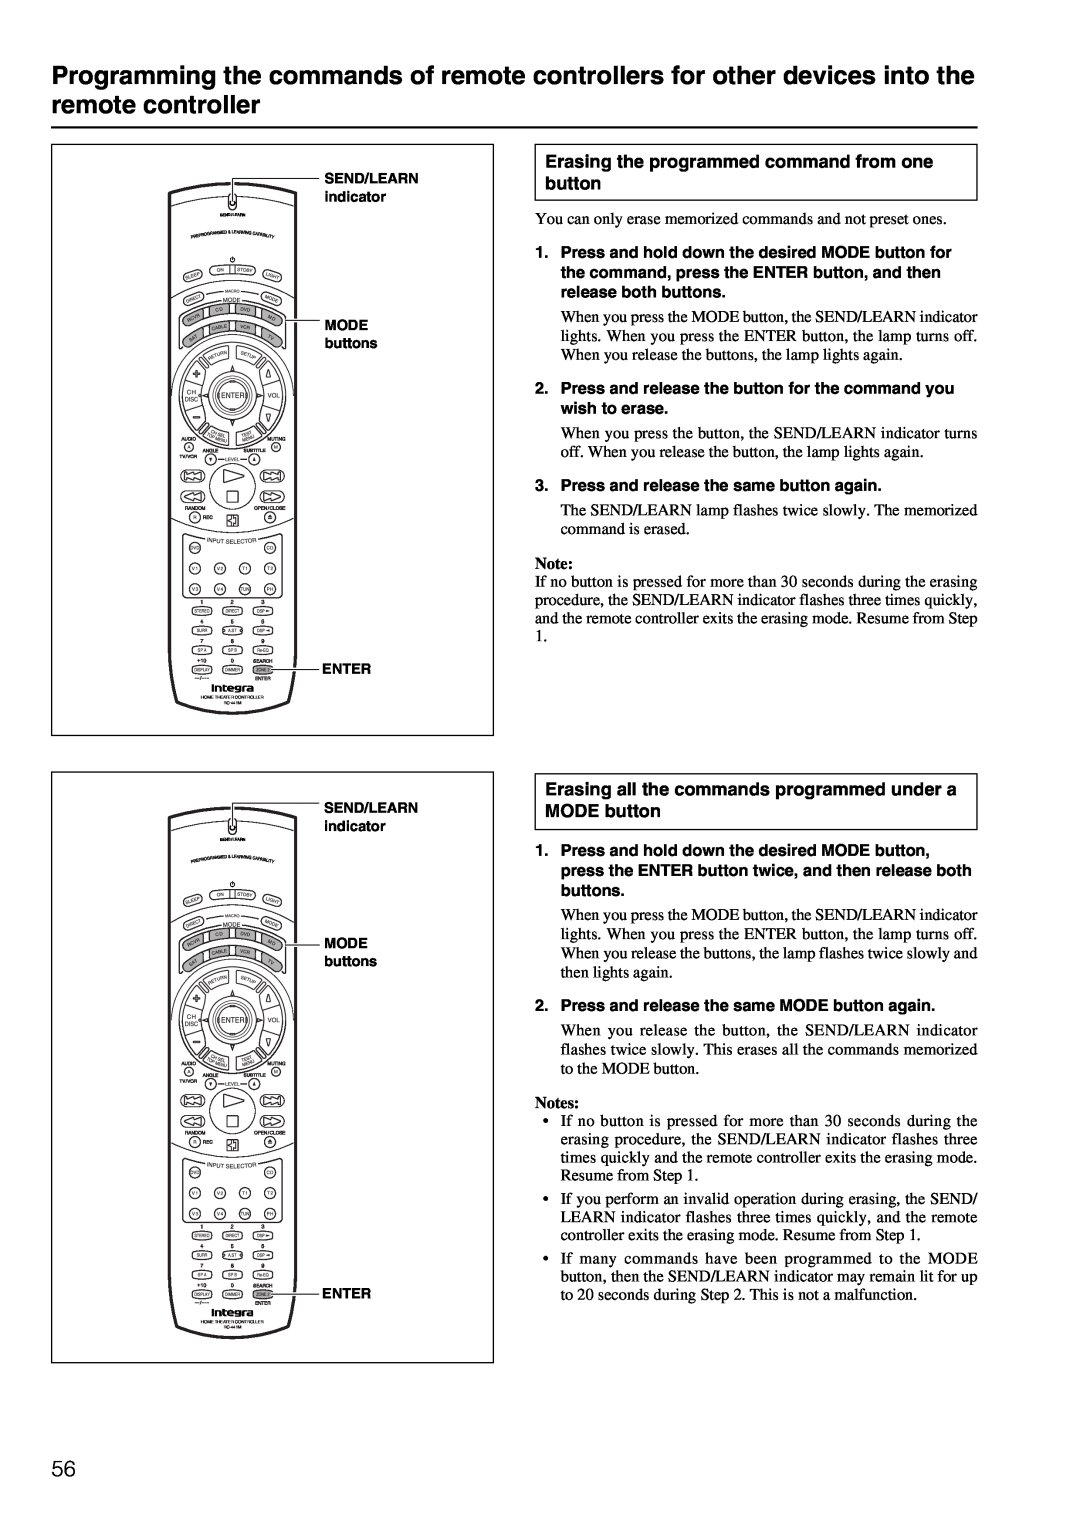 Integra DTR-6.2 instruction manual Erasing the programmed command from one button 